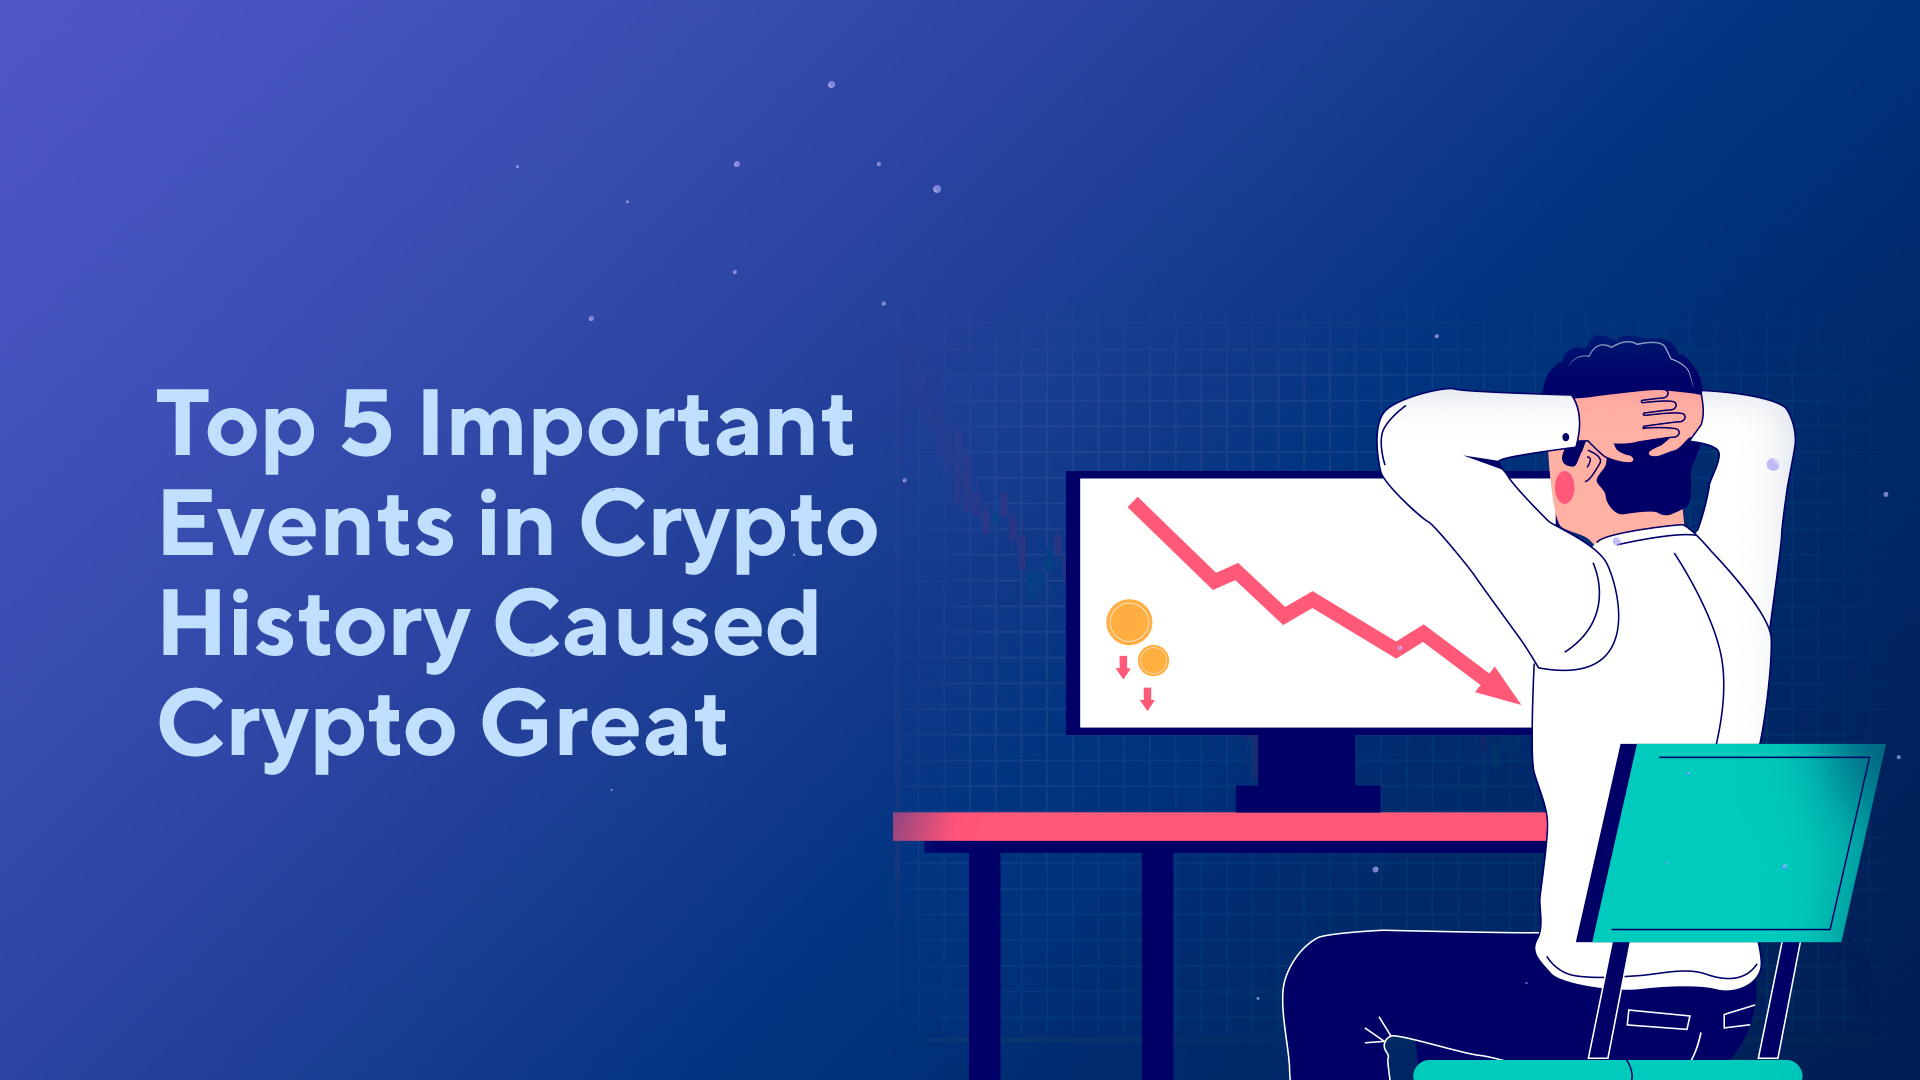 Top 5 Important Events in Crypto History Caused Crypto Great Reset